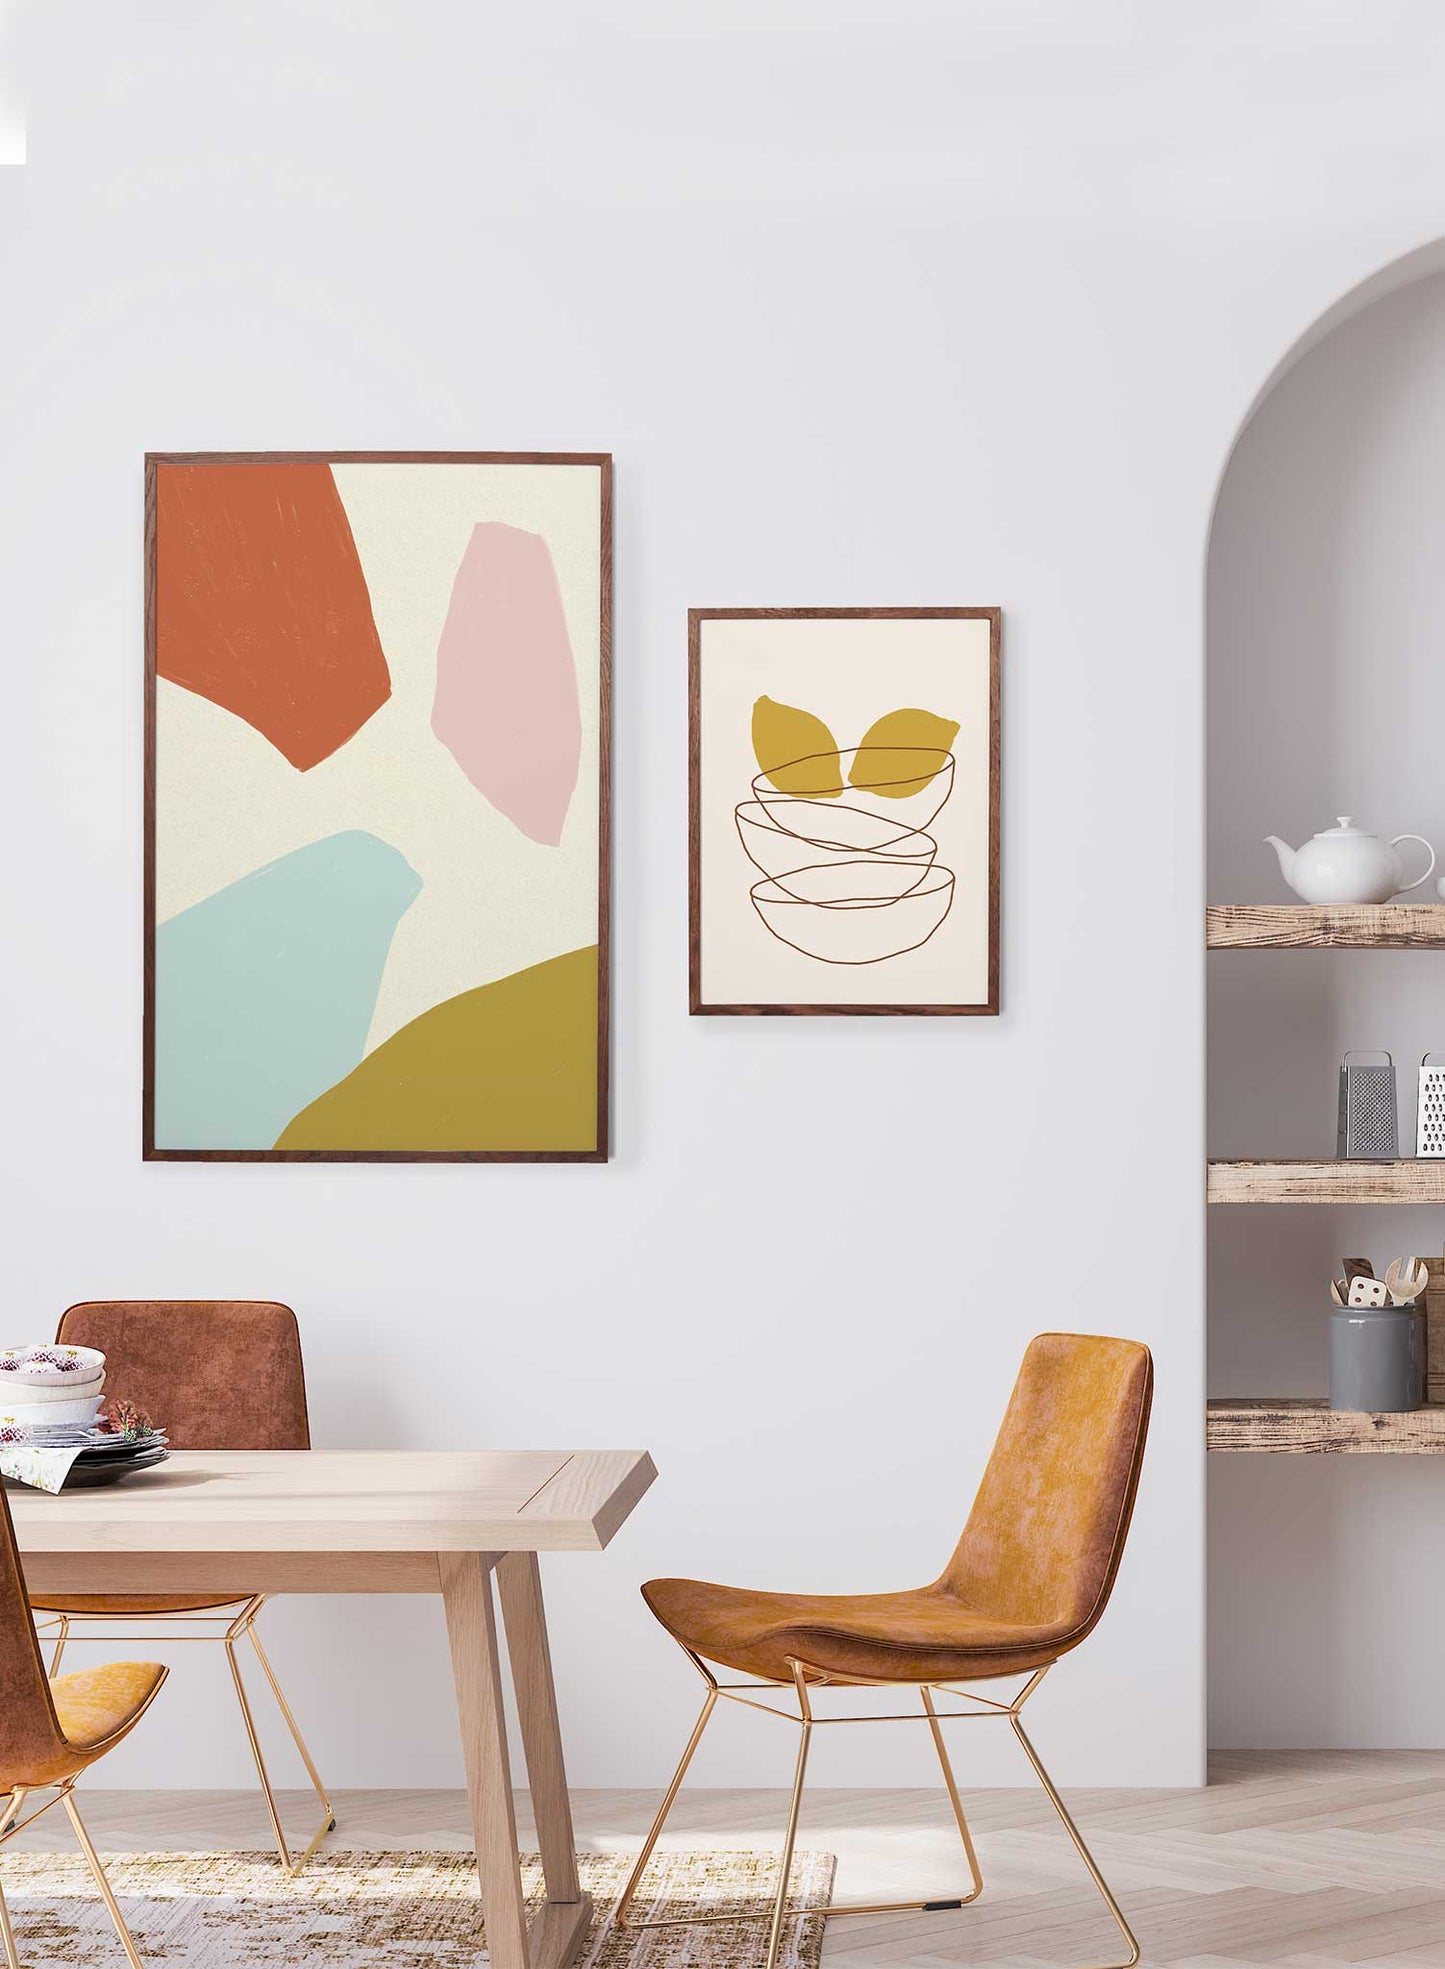 Shapin’ Up is a minimalist illustration poster of colourful abstract shapes by Opposite Wall.